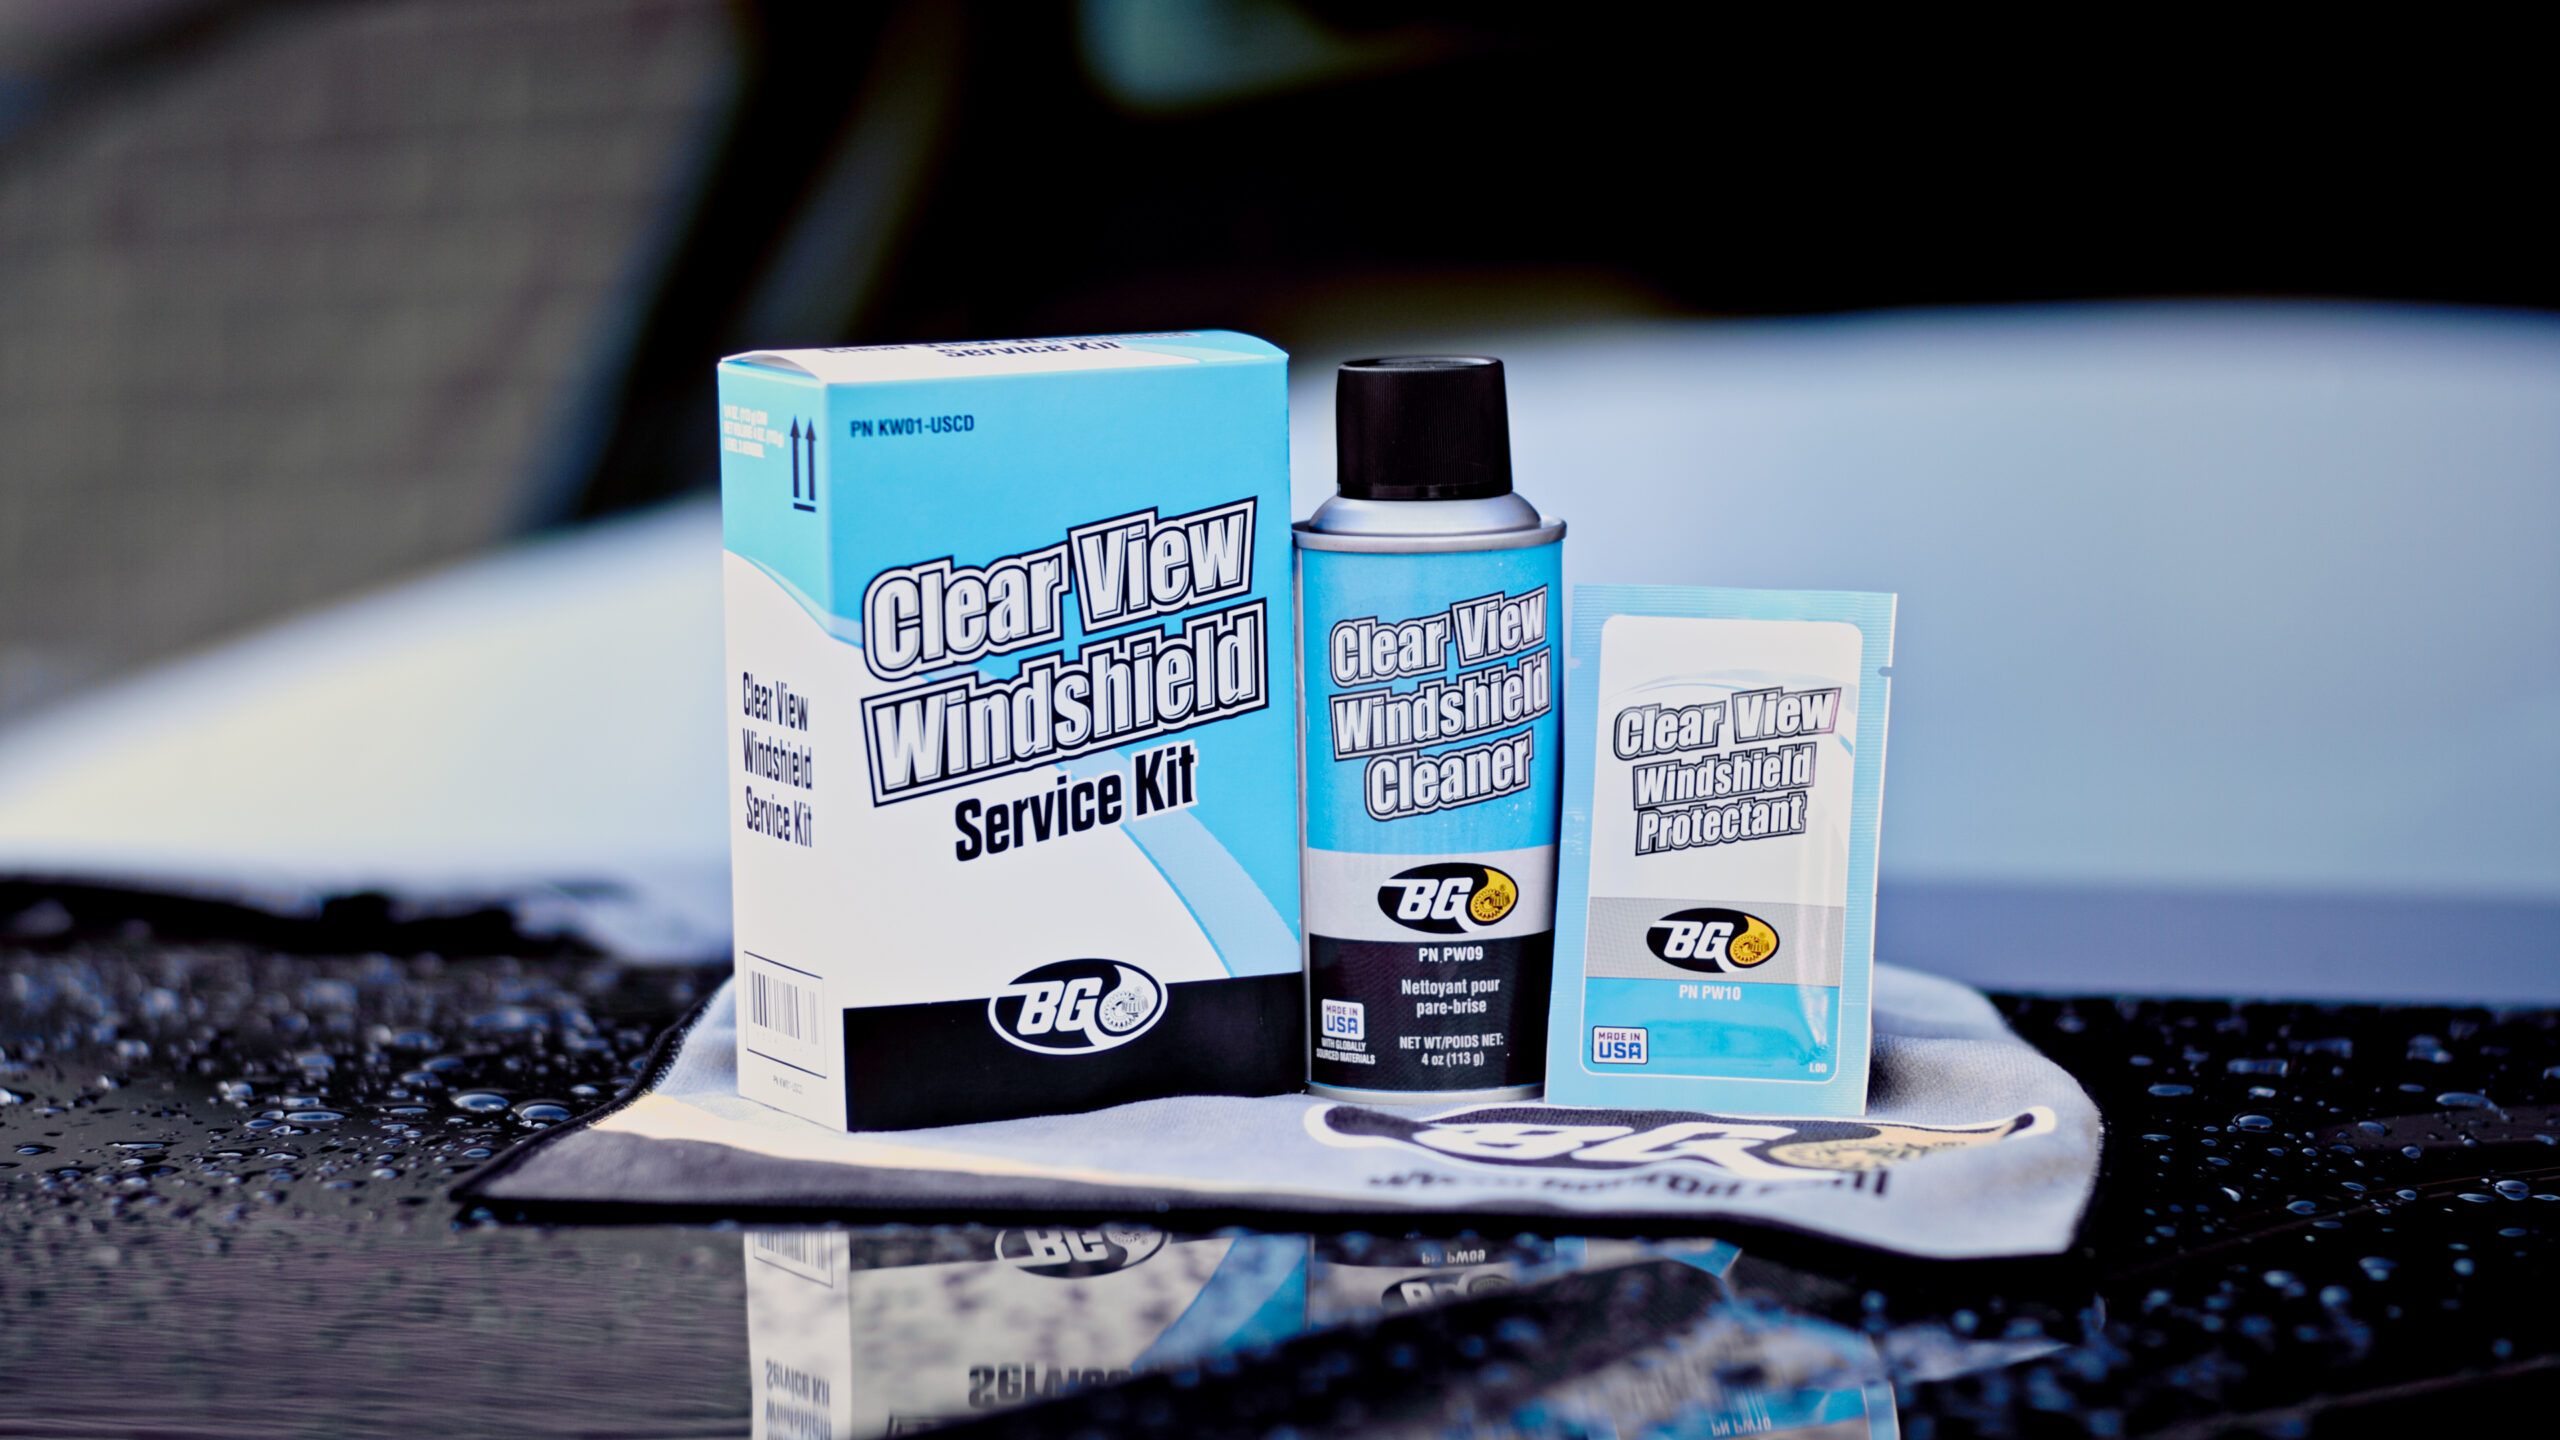 BG Clearview Windshield Service Kit